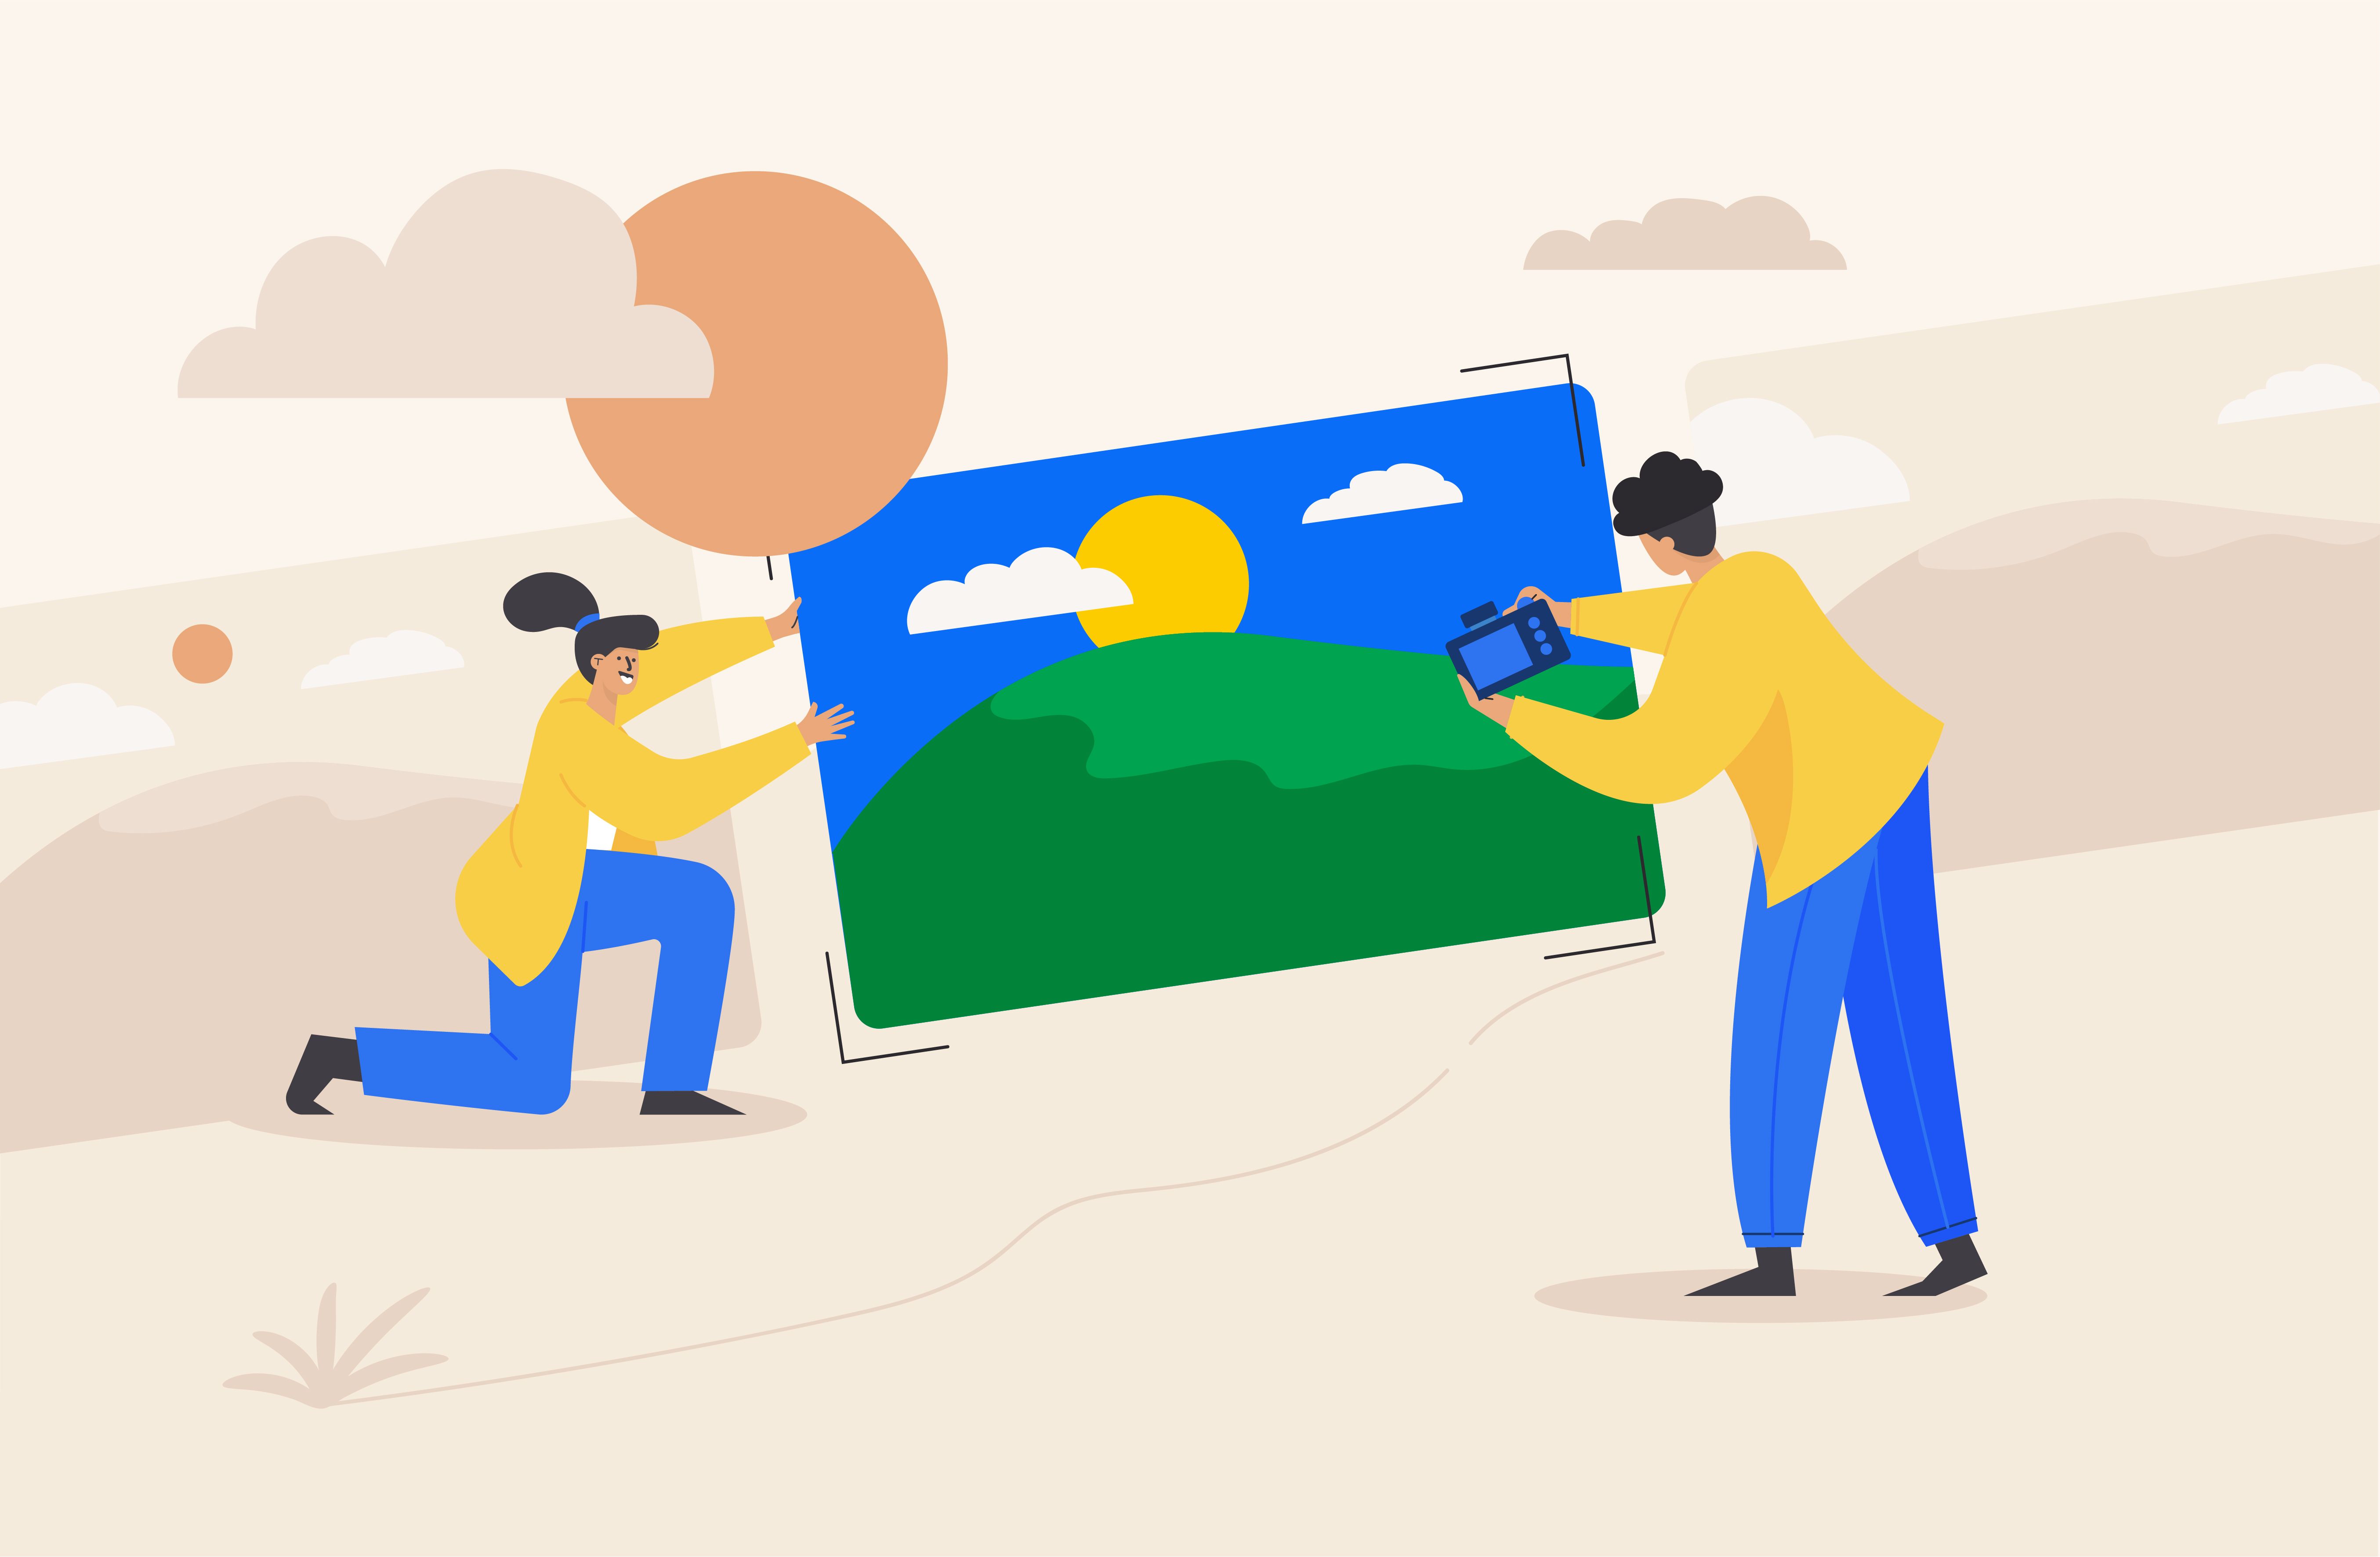 Creative Process in Designing with Transparent Backgrounds - Illustration of Two People Editing a Landscape Image